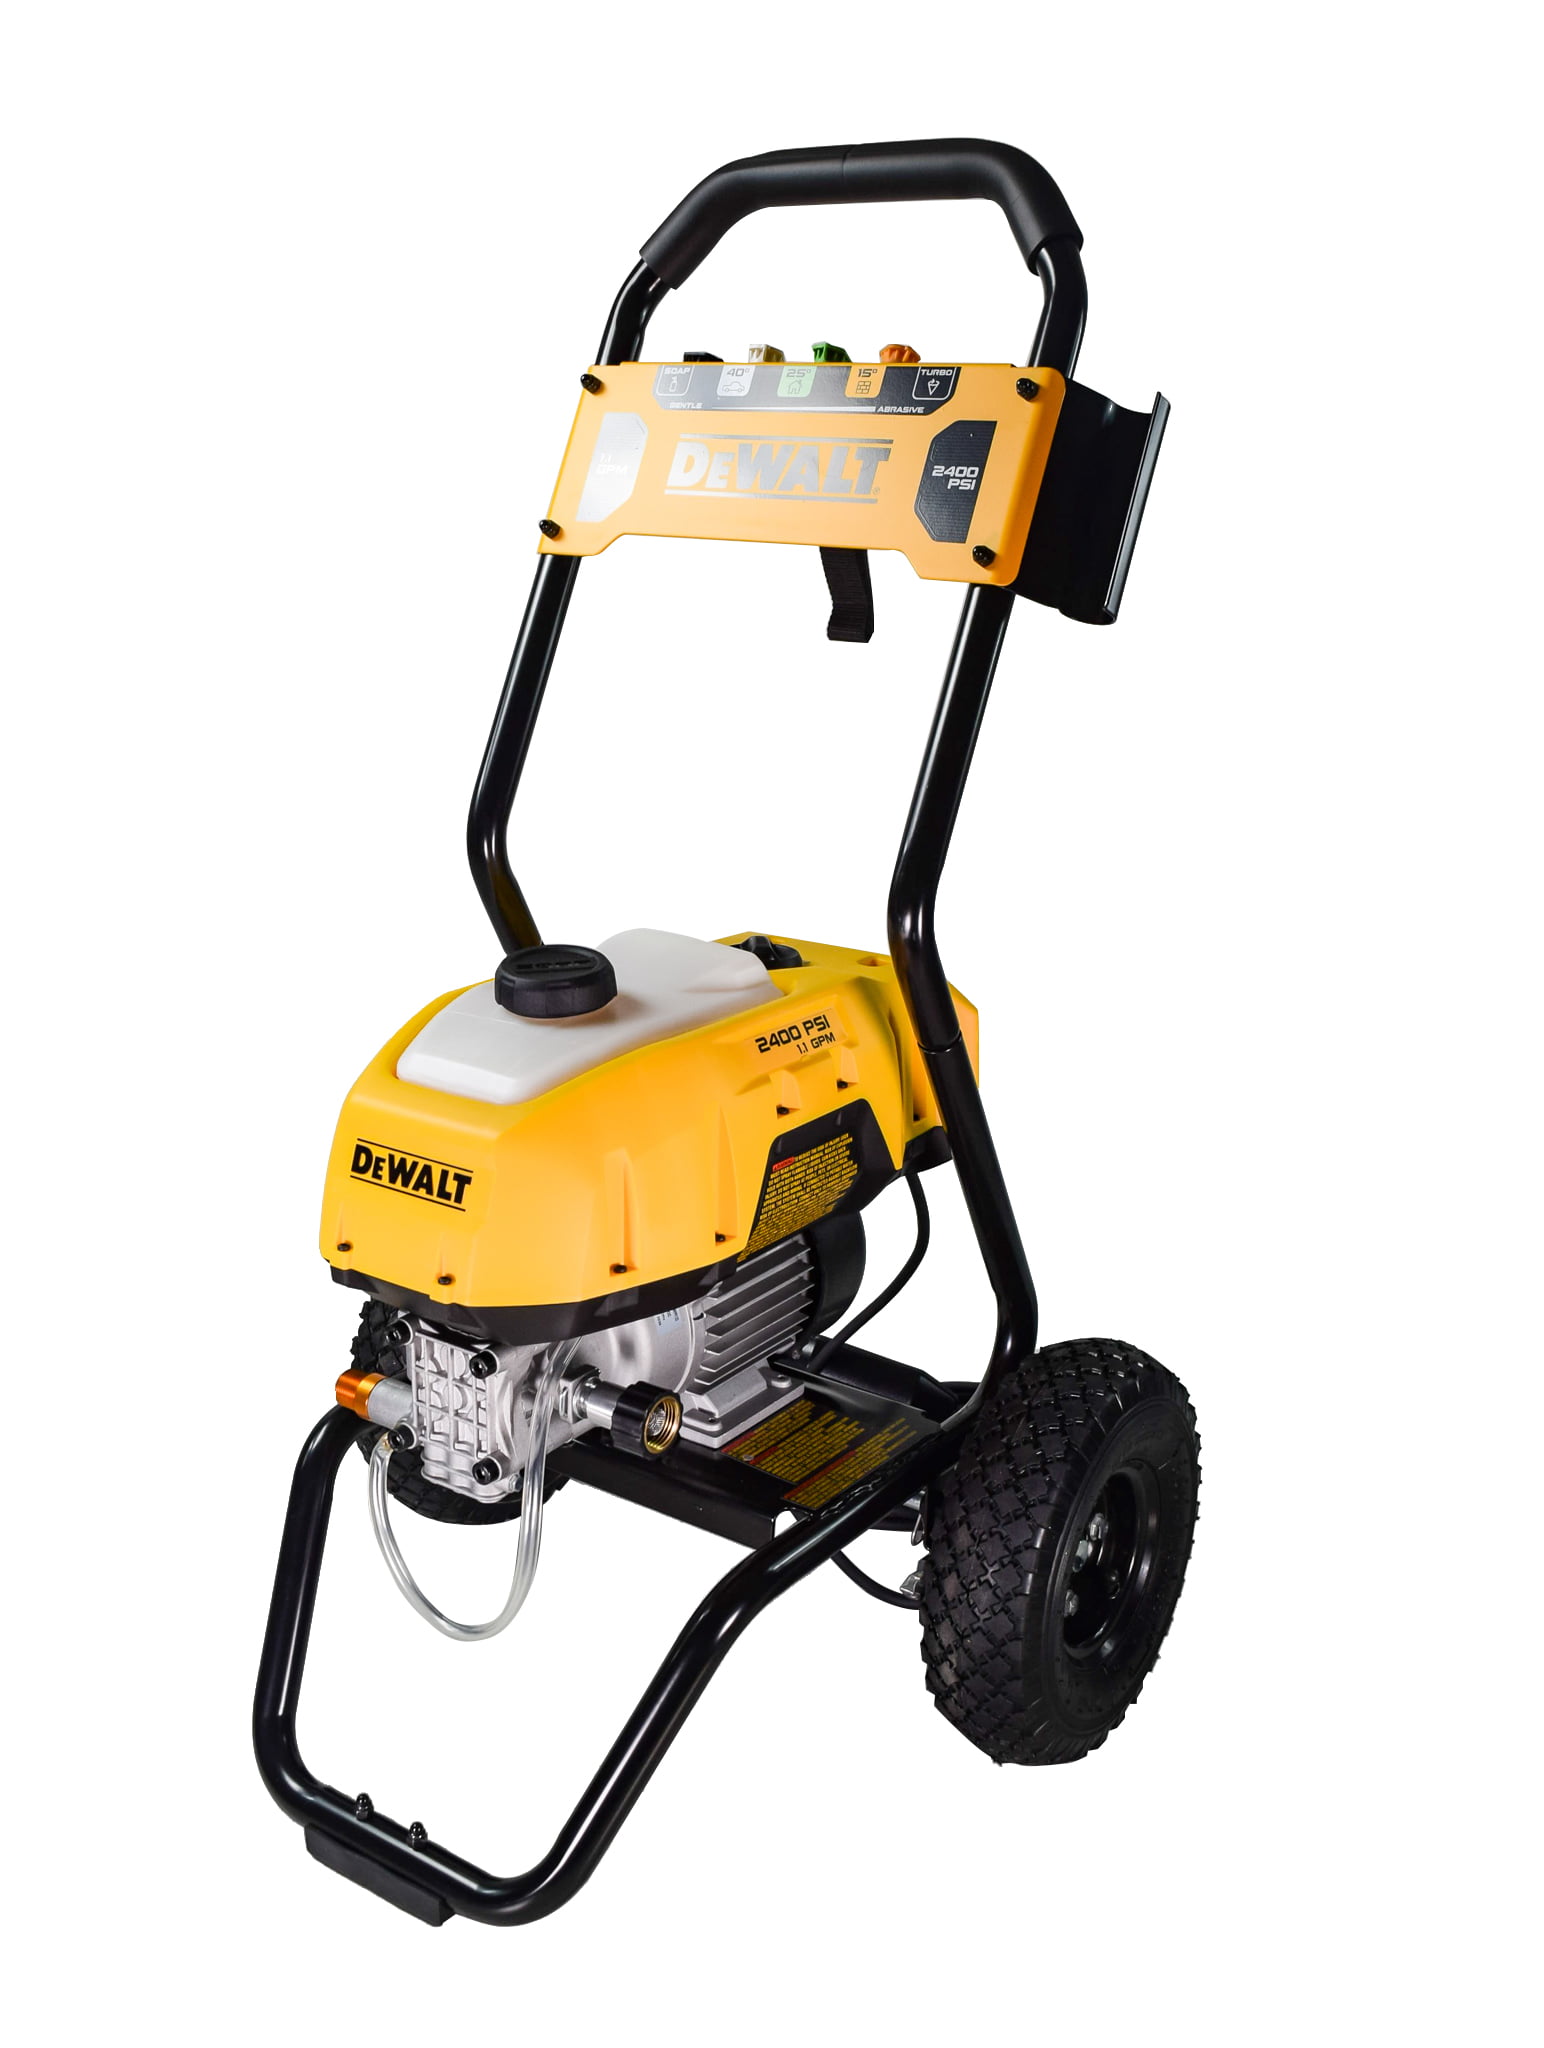 2400 PSI 13 Amp Electric Cold-Water Pressure Washer